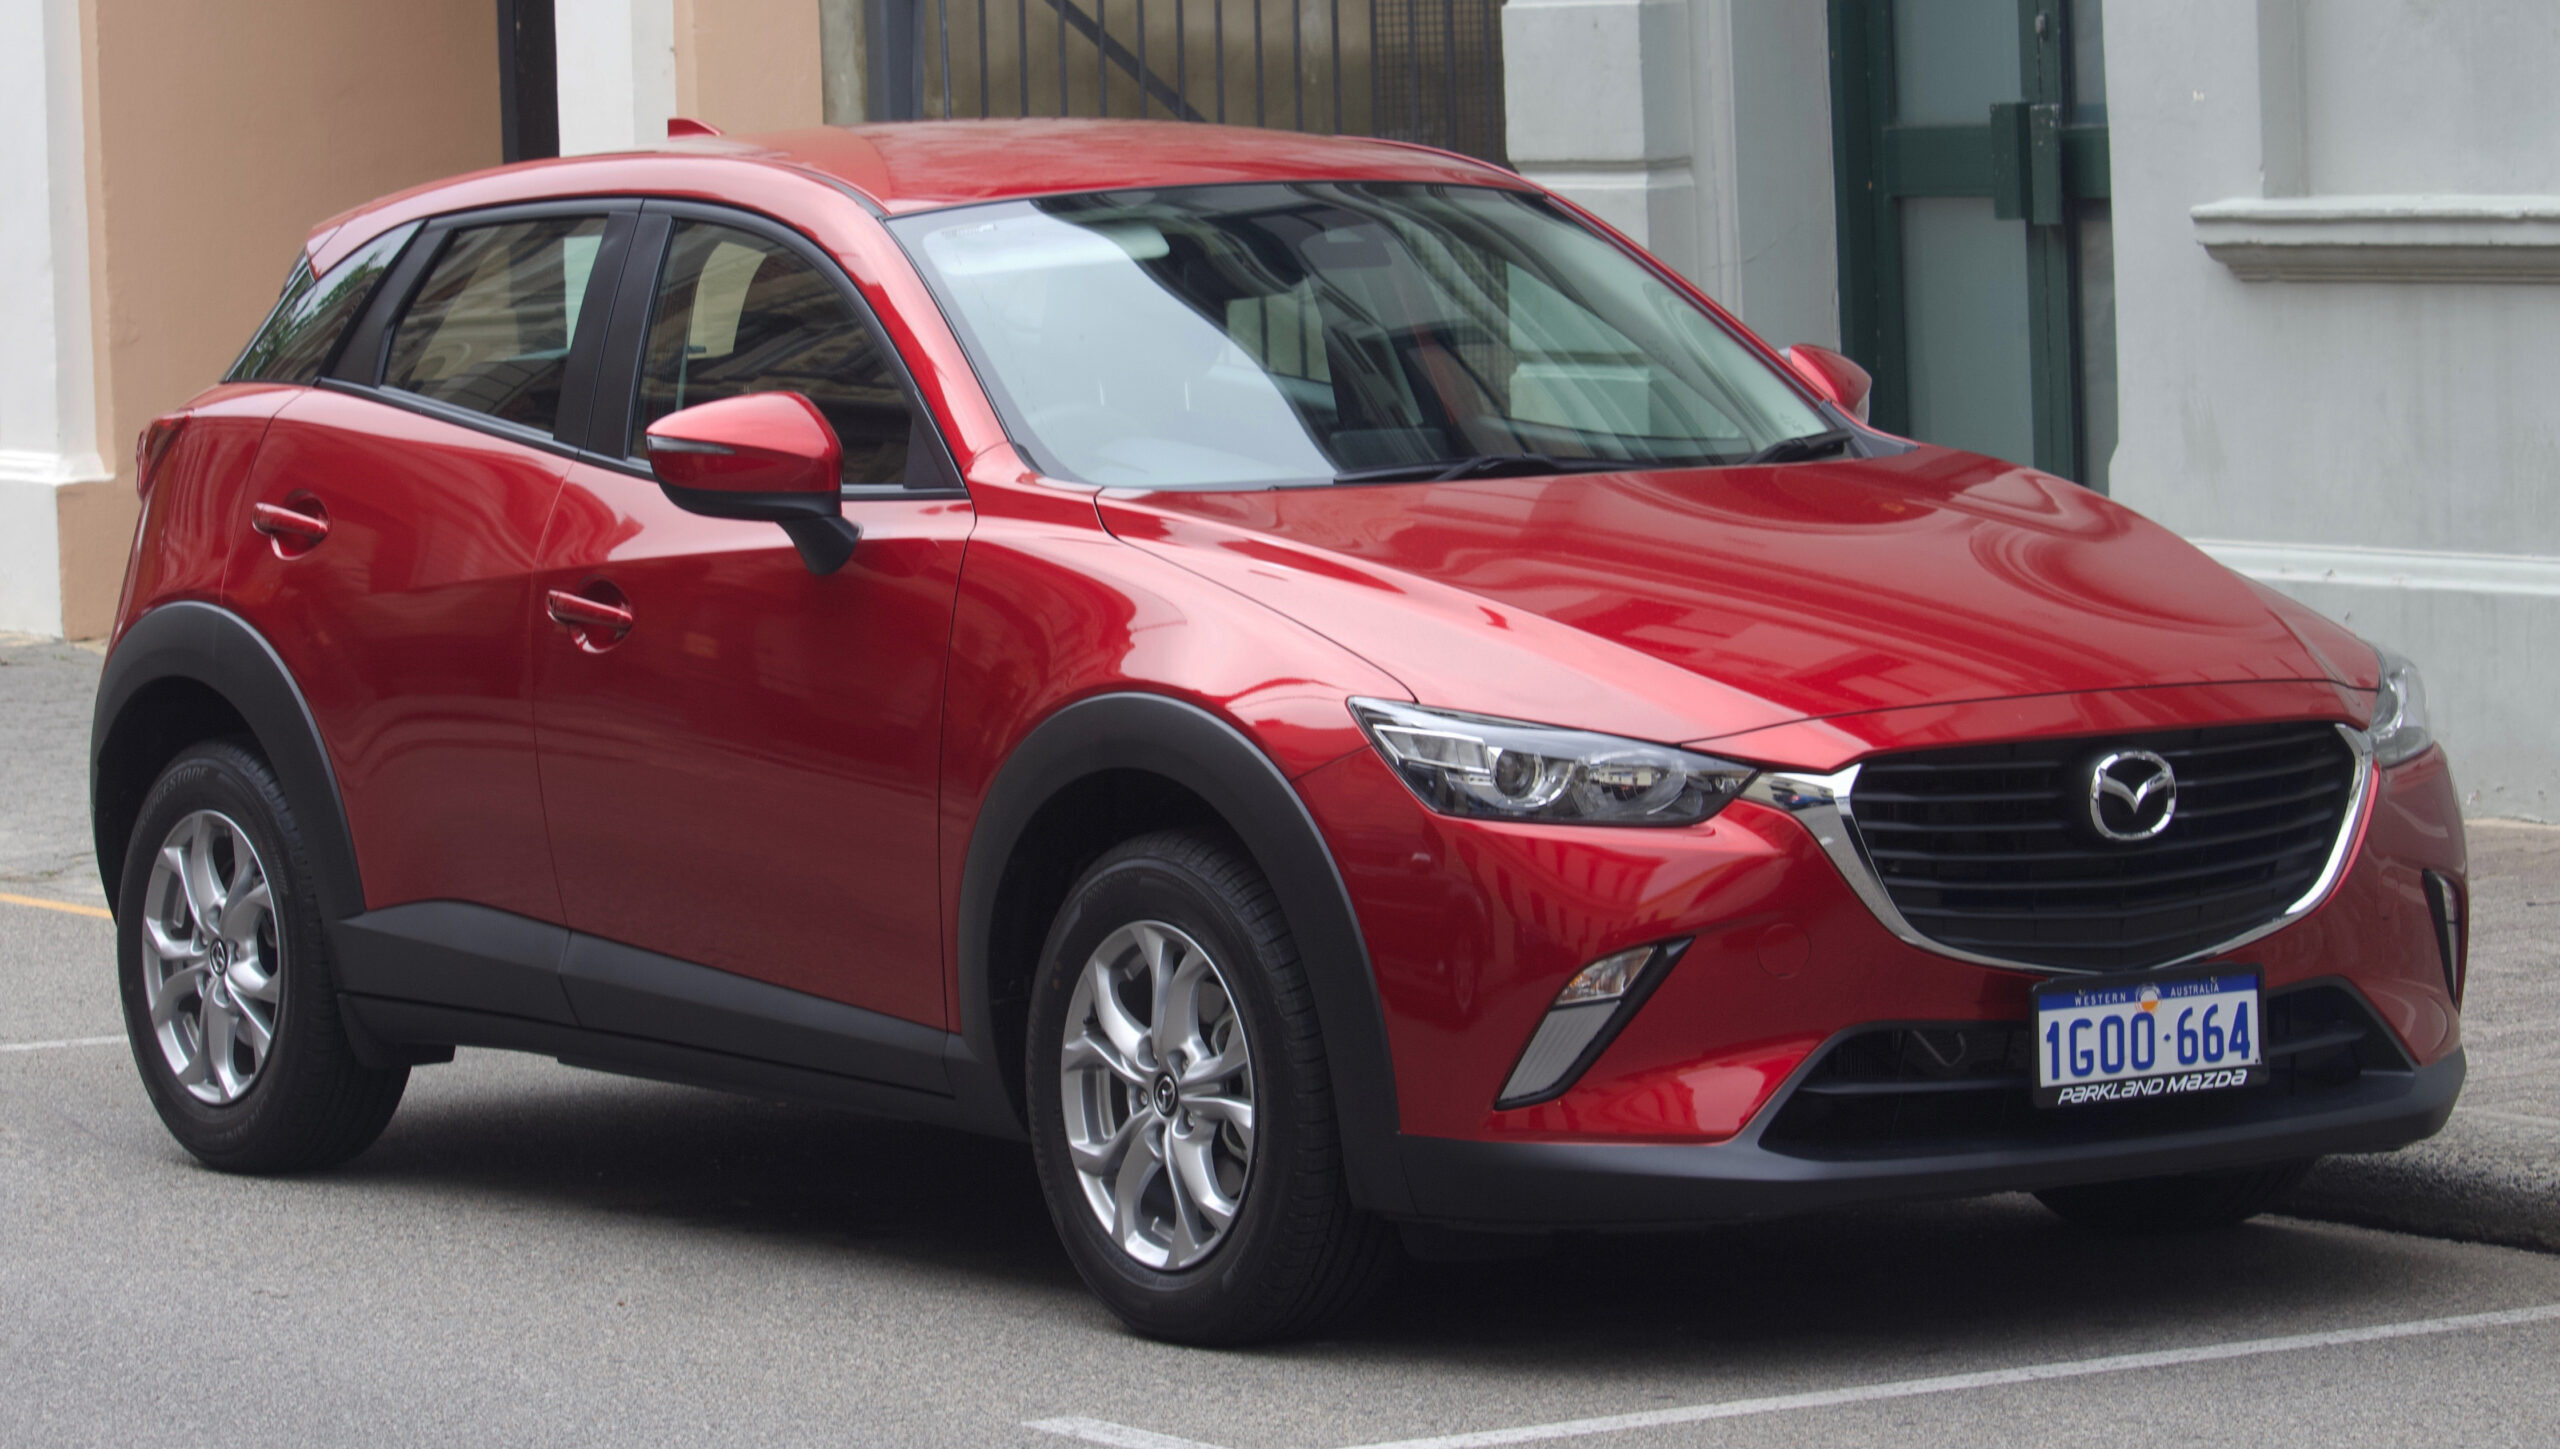 7 Benefits of Purchasing a Certified Pre-Owned Mazda